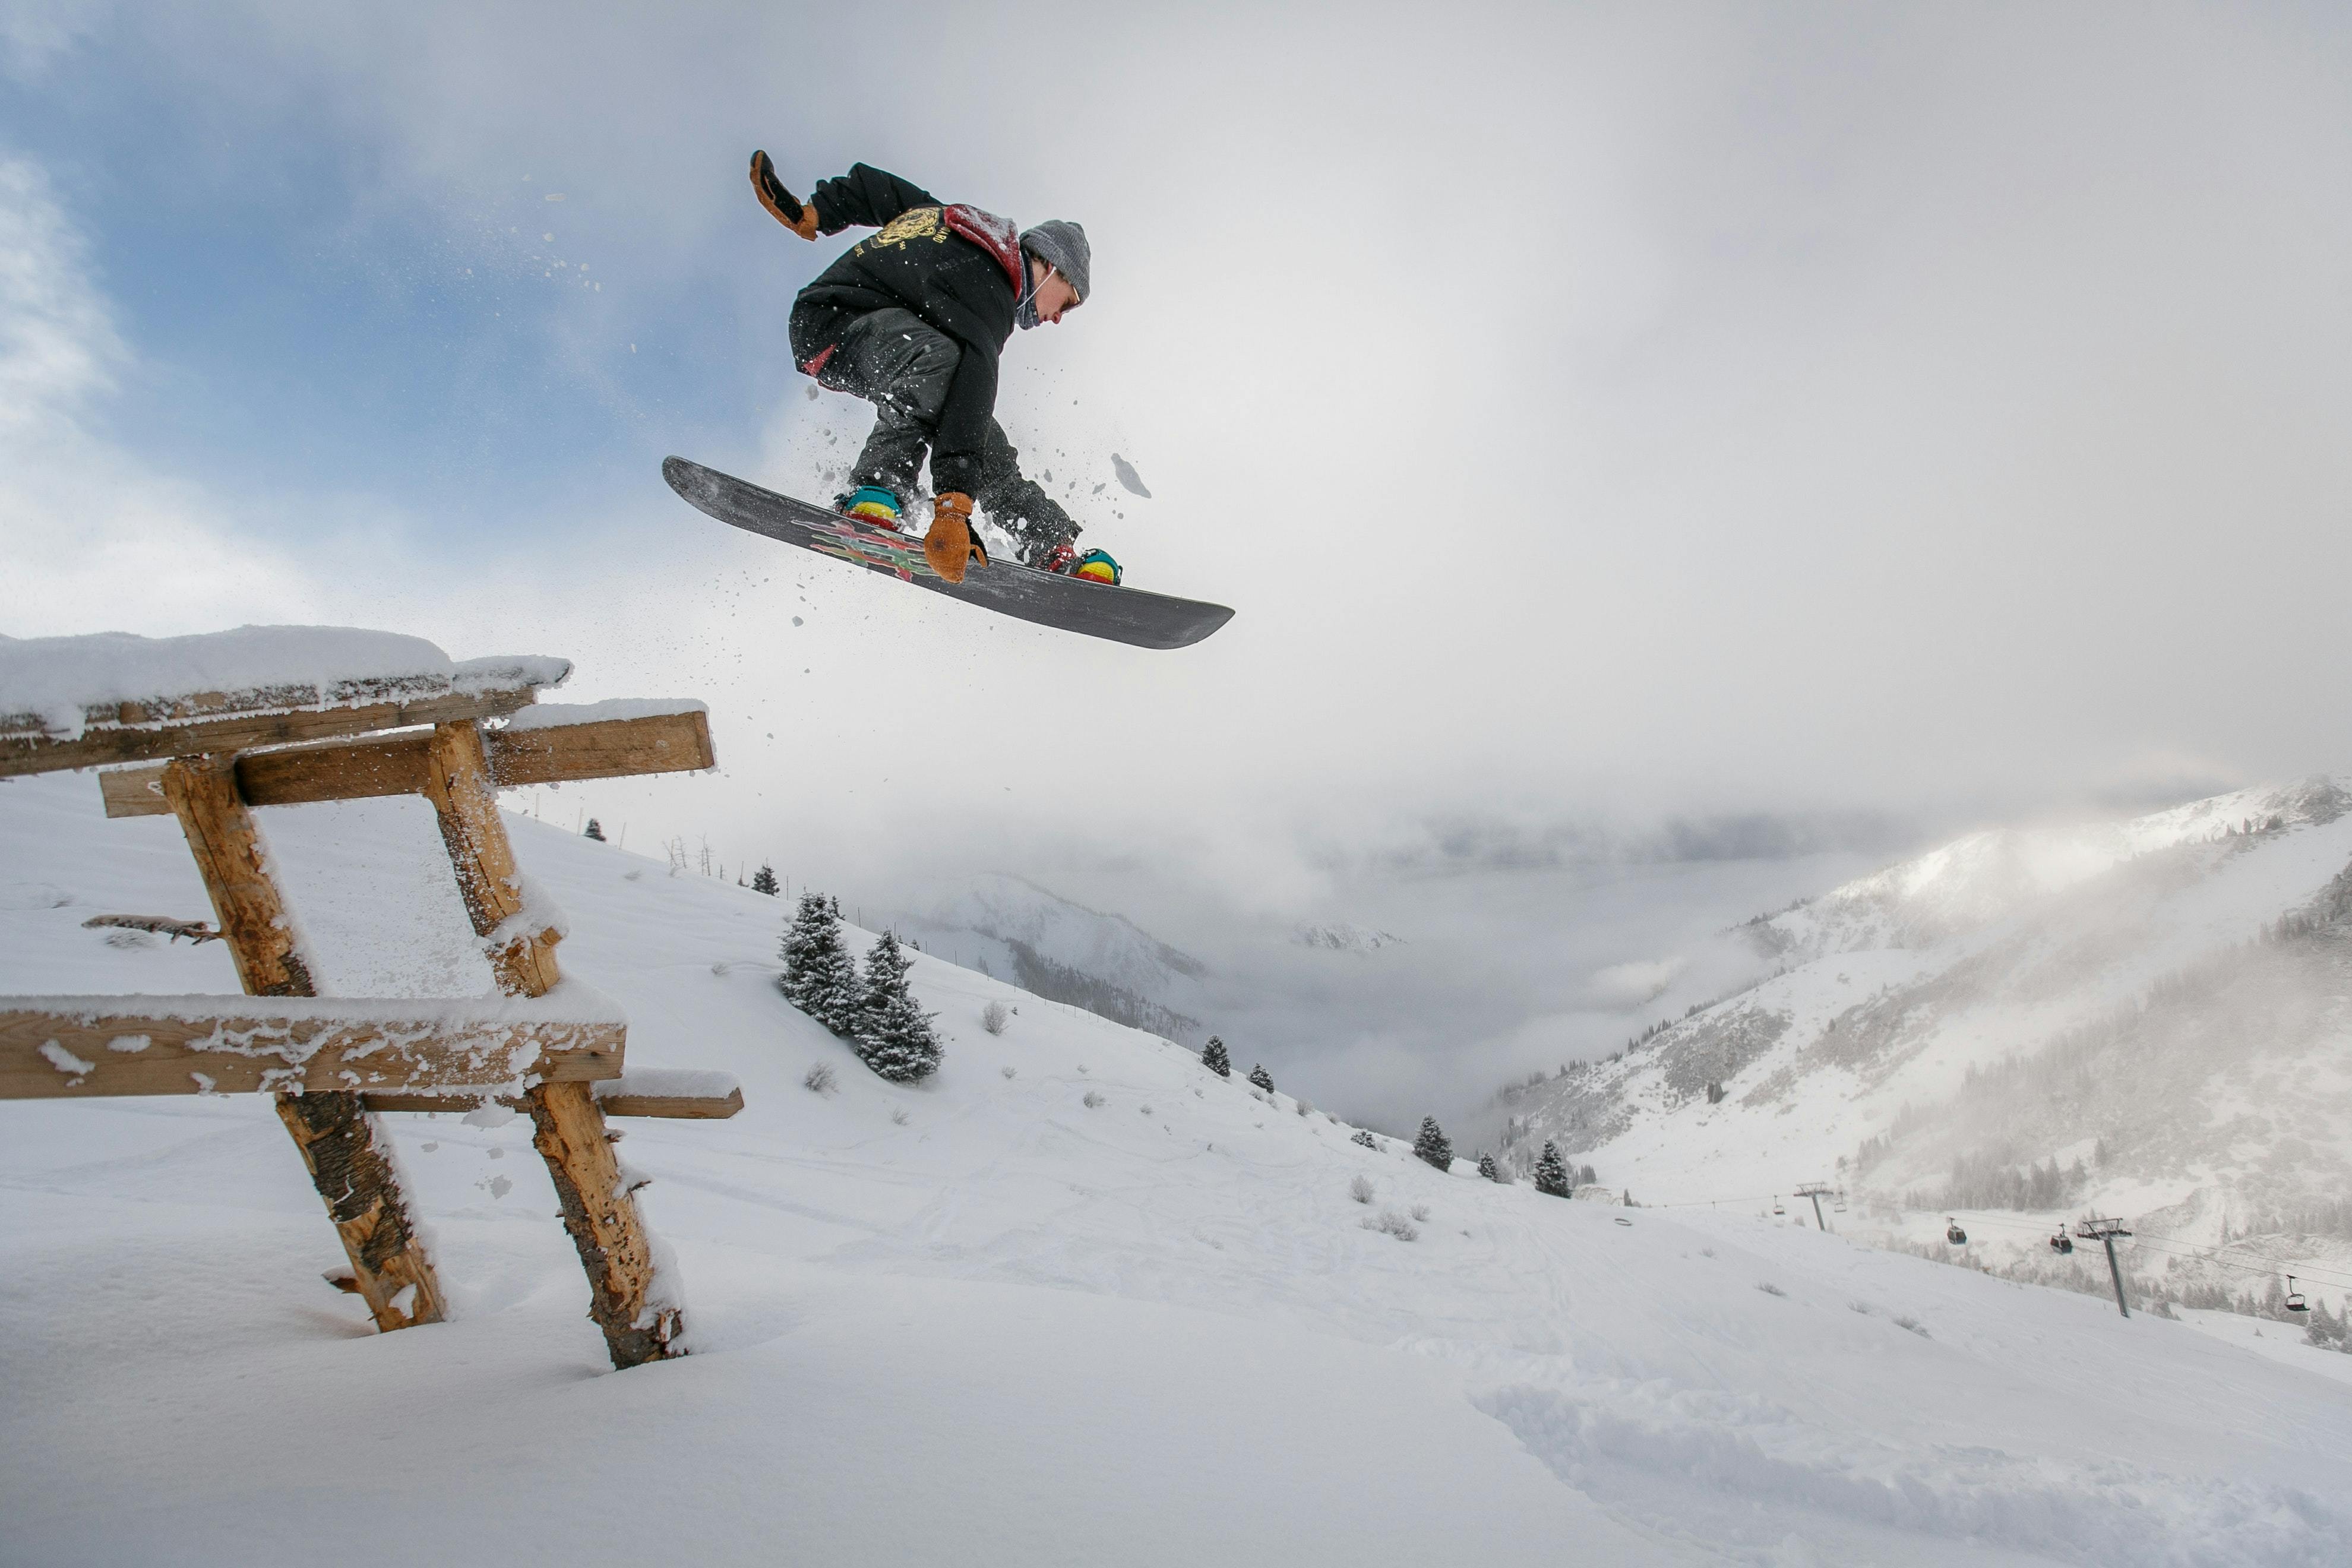 A snowboarder jumps over a wooden structure. He is really high in the air and grabbing his snowboard. There is a lot of snow on the ground and its cloudy outside. 